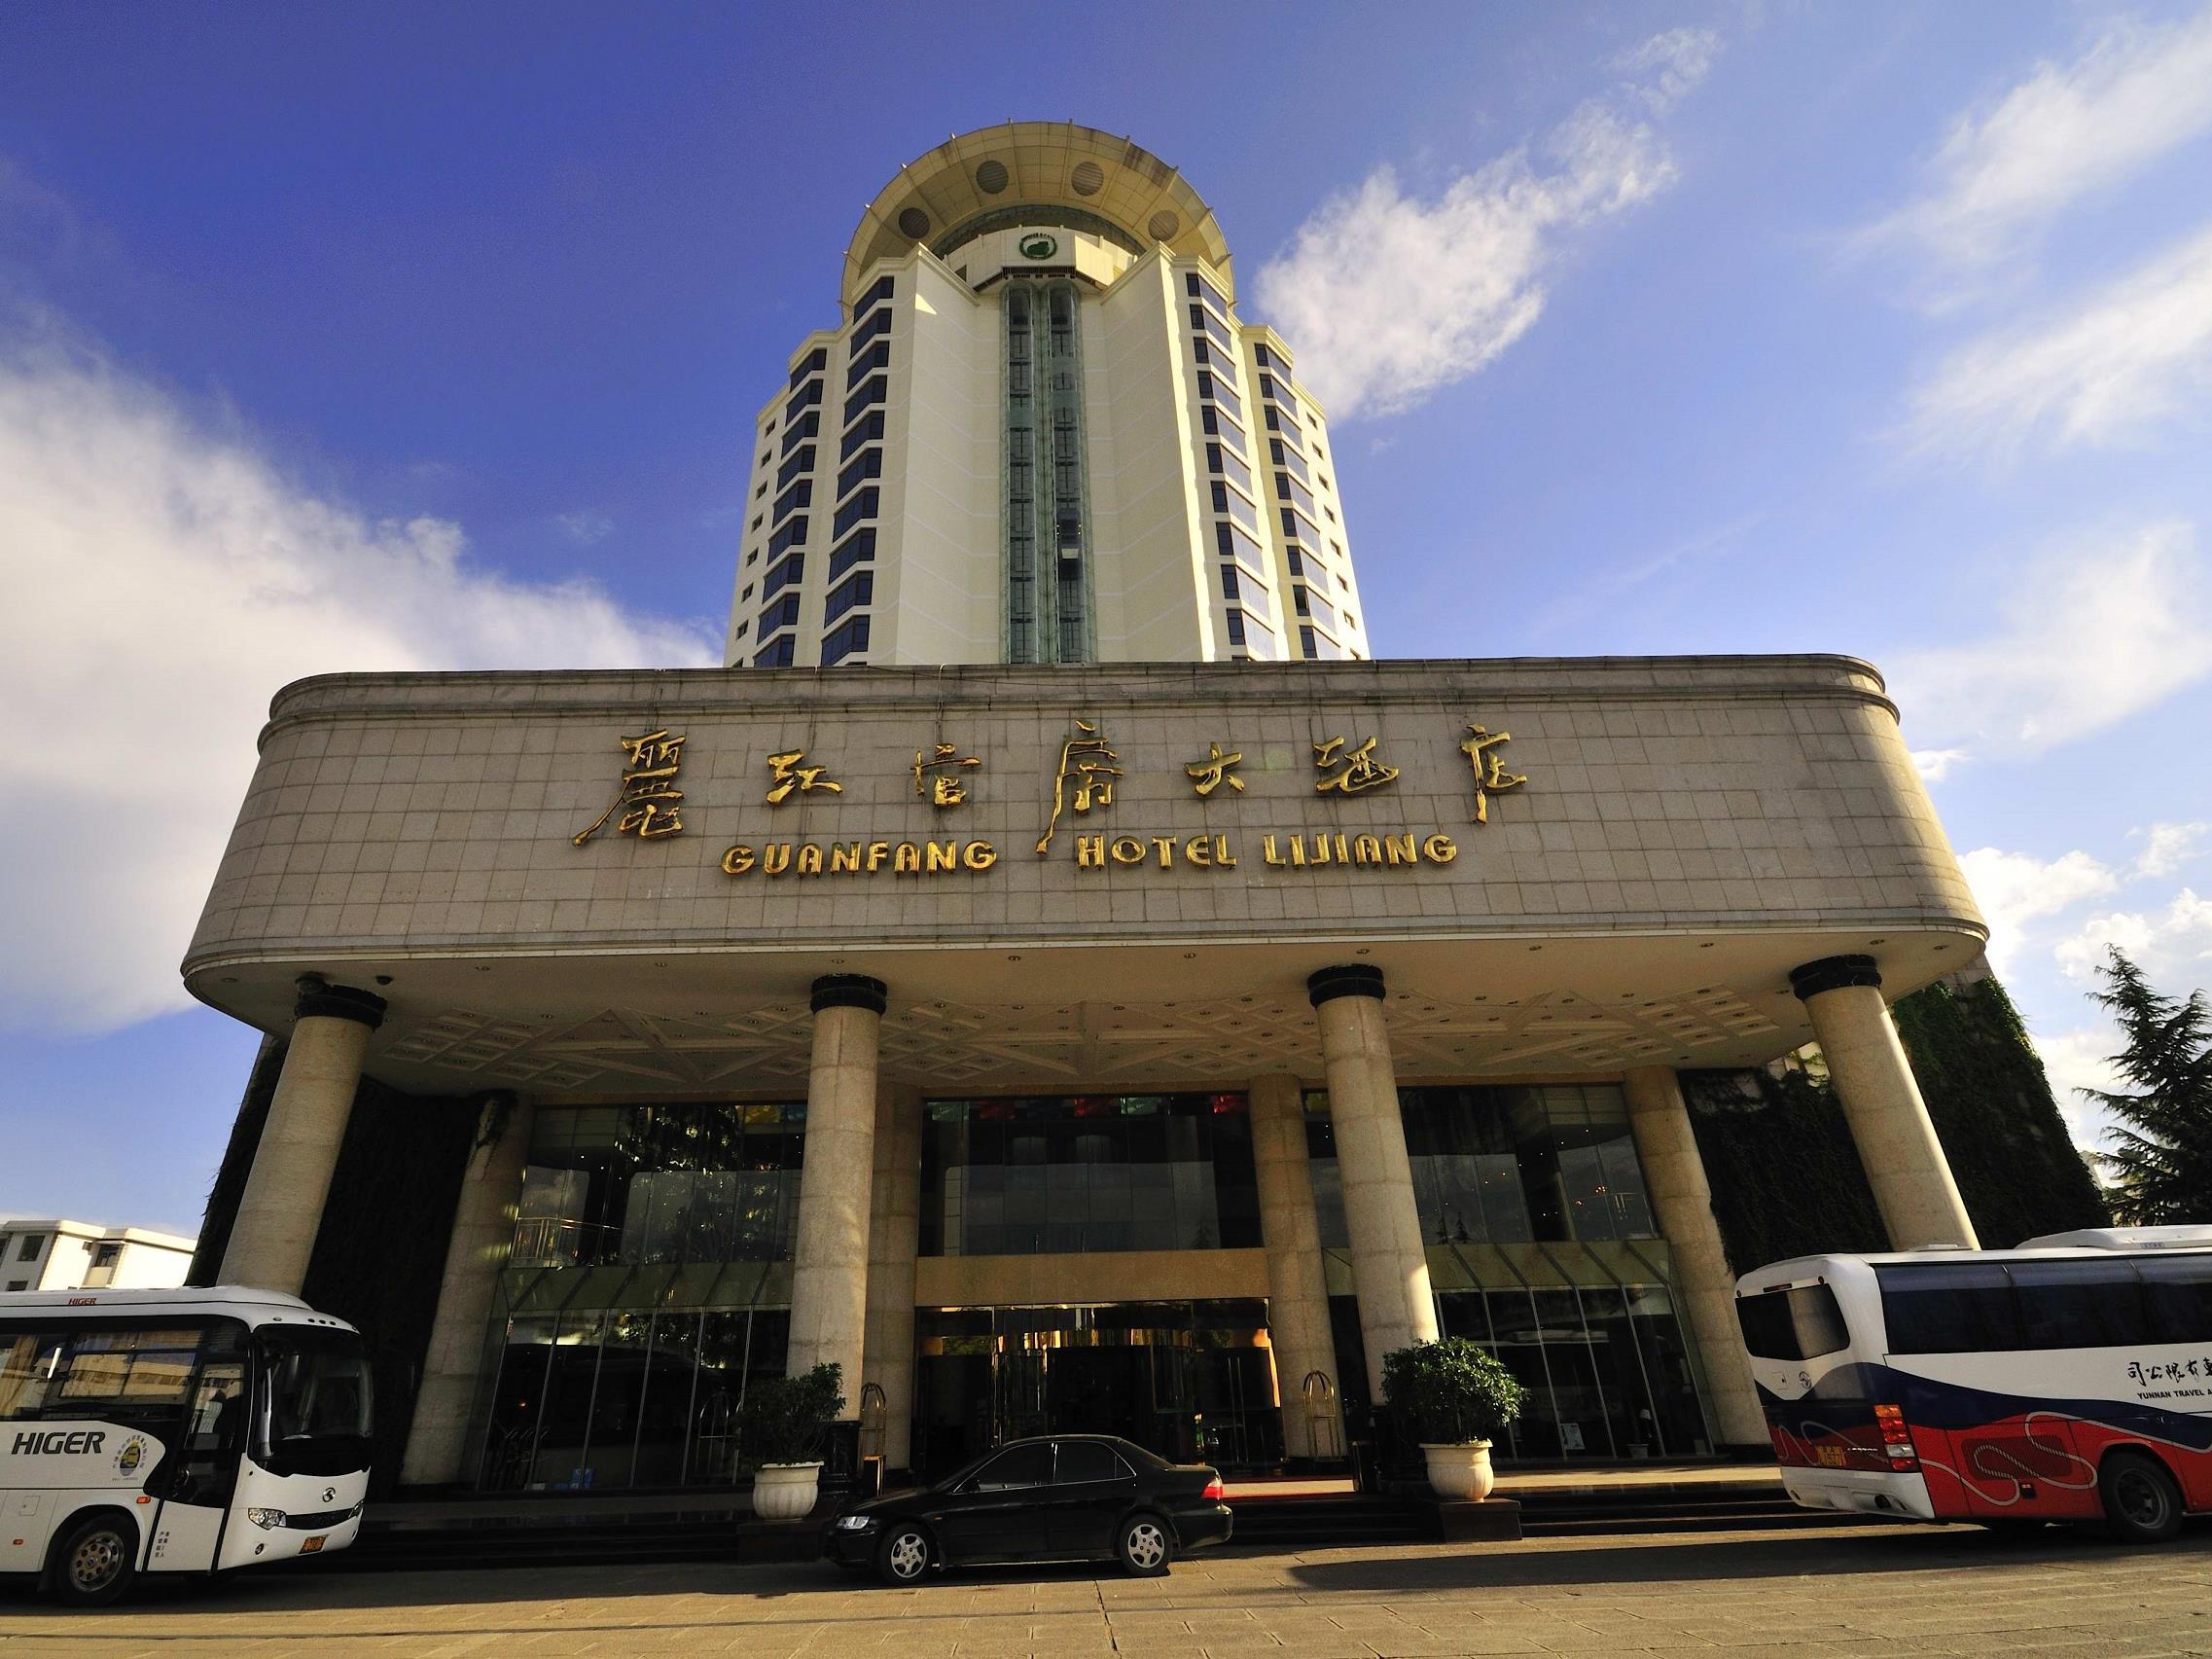 Lijiang Guanfang Hotel Lijiang FAQ 2017, What facilities are there in Lijiang Guanfang Hotel Lijiang 2017, What Languages Spoken are Supported in Lijiang Guanfang Hotel Lijiang 2017, Which payment cards are accepted in Lijiang Guanfang Hotel Lijiang , Lijiang Lijiang Guanfang Hotel room facilities and services Q&A 2017, Lijiang Lijiang Guanfang Hotel online booking services 2017, Lijiang Lijiang Guanfang Hotel address 2017, Lijiang Lijiang Guanfang Hotel telephone number 2017,Lijiang Lijiang Guanfang Hotel map 2017, Lijiang Lijiang Guanfang Hotel traffic guide 2017, how to go Lijiang Lijiang Guanfang Hotel, Lijiang Lijiang Guanfang Hotel booking online 2017, Lijiang Lijiang Guanfang Hotel room types 2017.